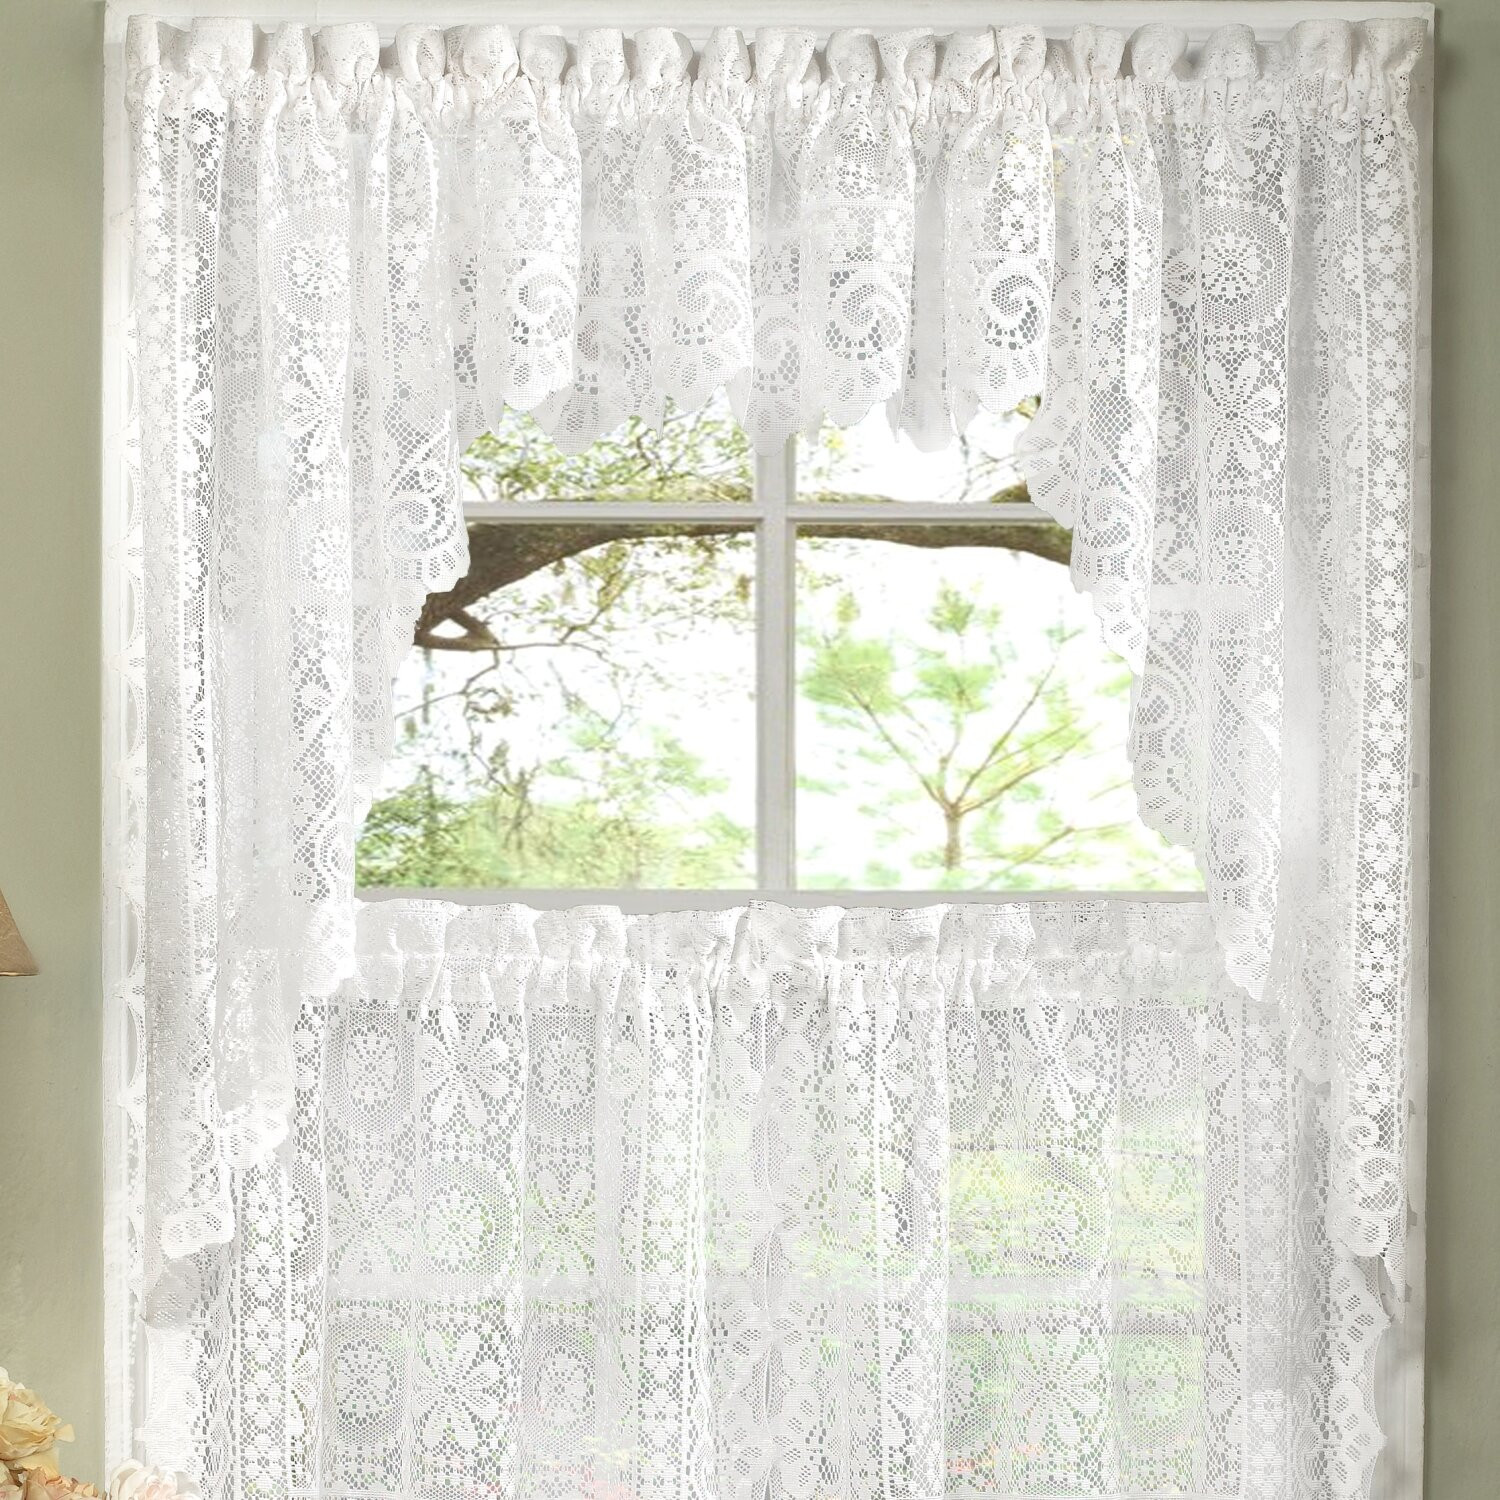 Lace Kitchen Curtain
 Sweet Home Collection Old World Style Floral Heavy Lace